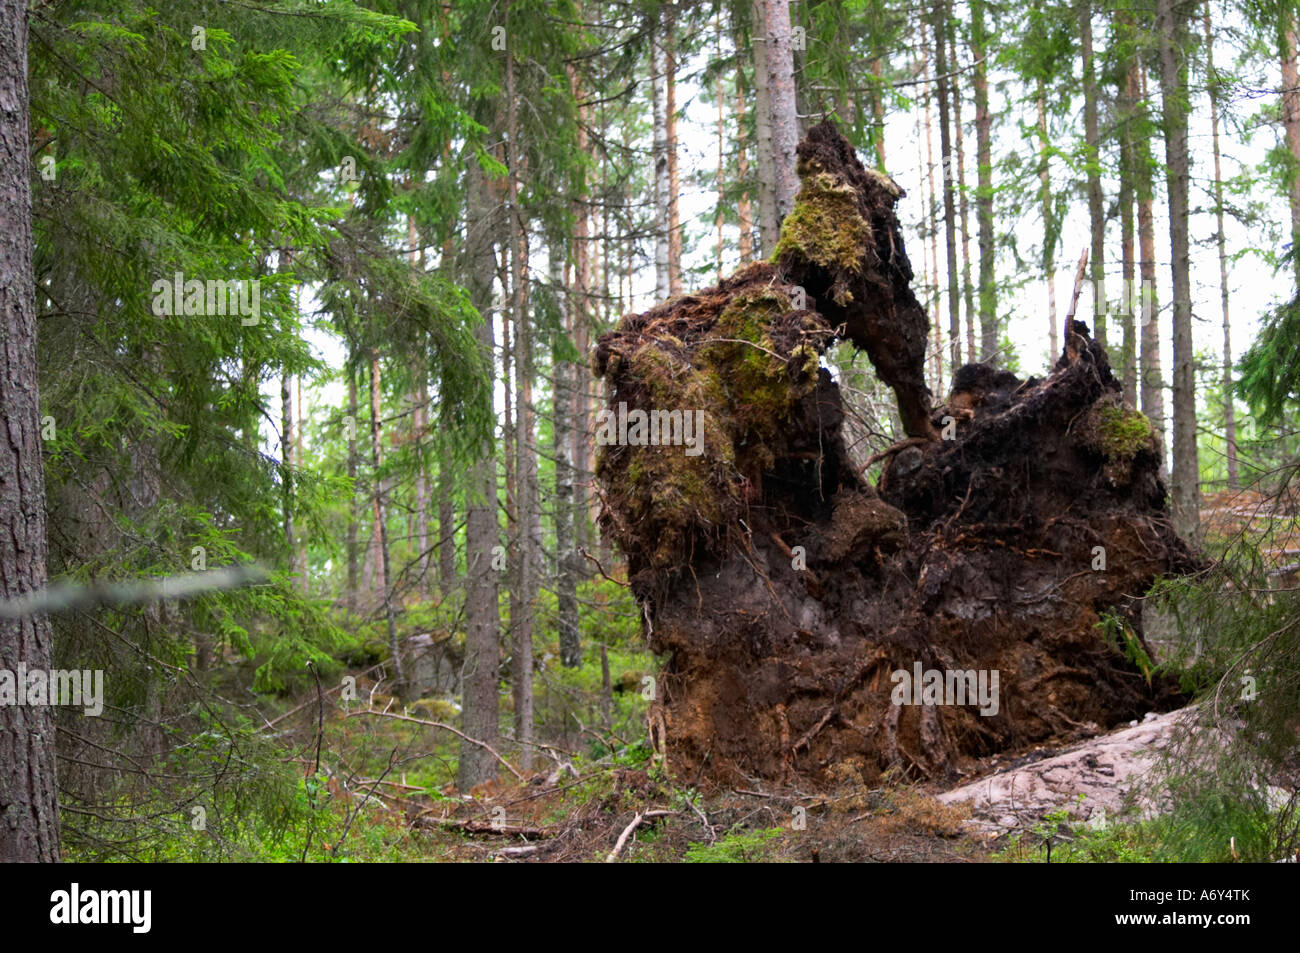 Pine tree roots from a tree in a forest felled by strong storm winds. Smaland region. Sweden, Europe. Stock Photo